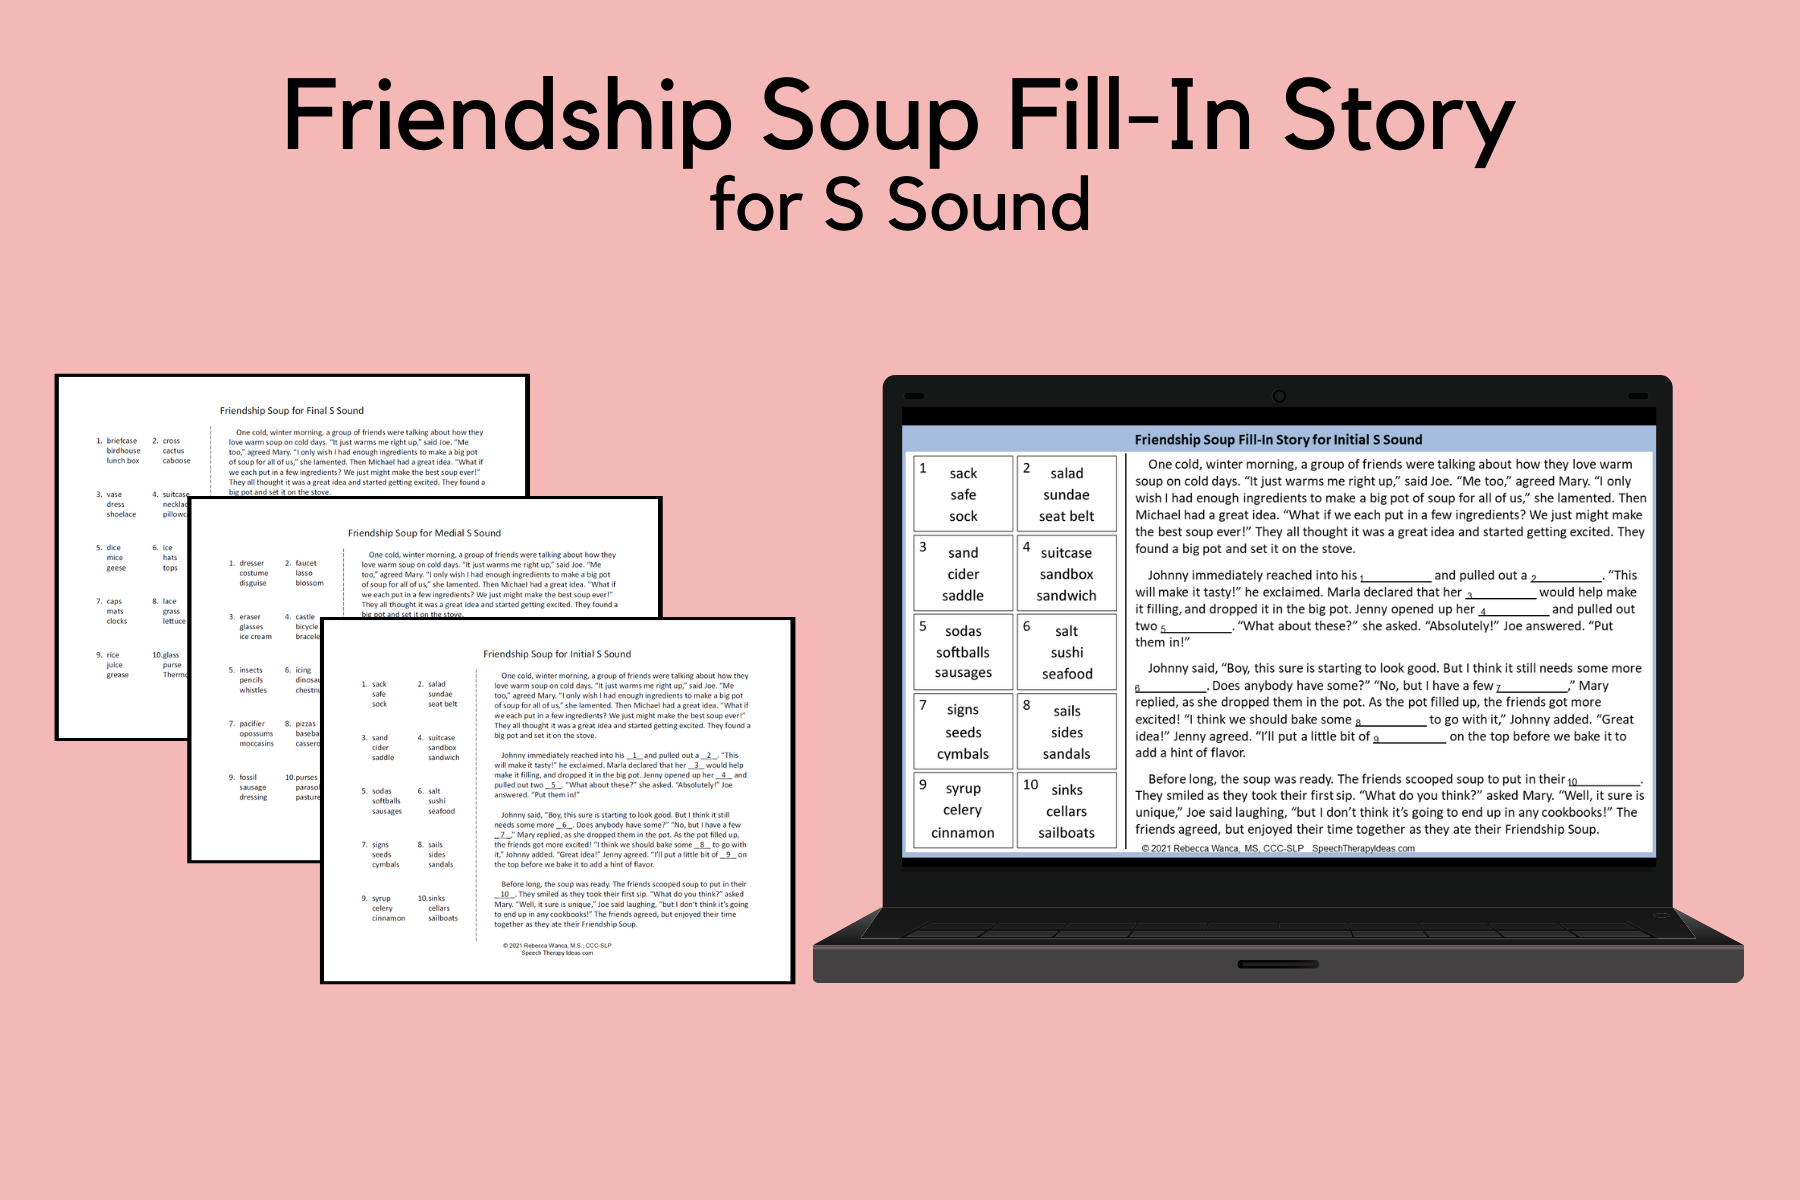 Friendship Soup Fill-In Story for S Sound